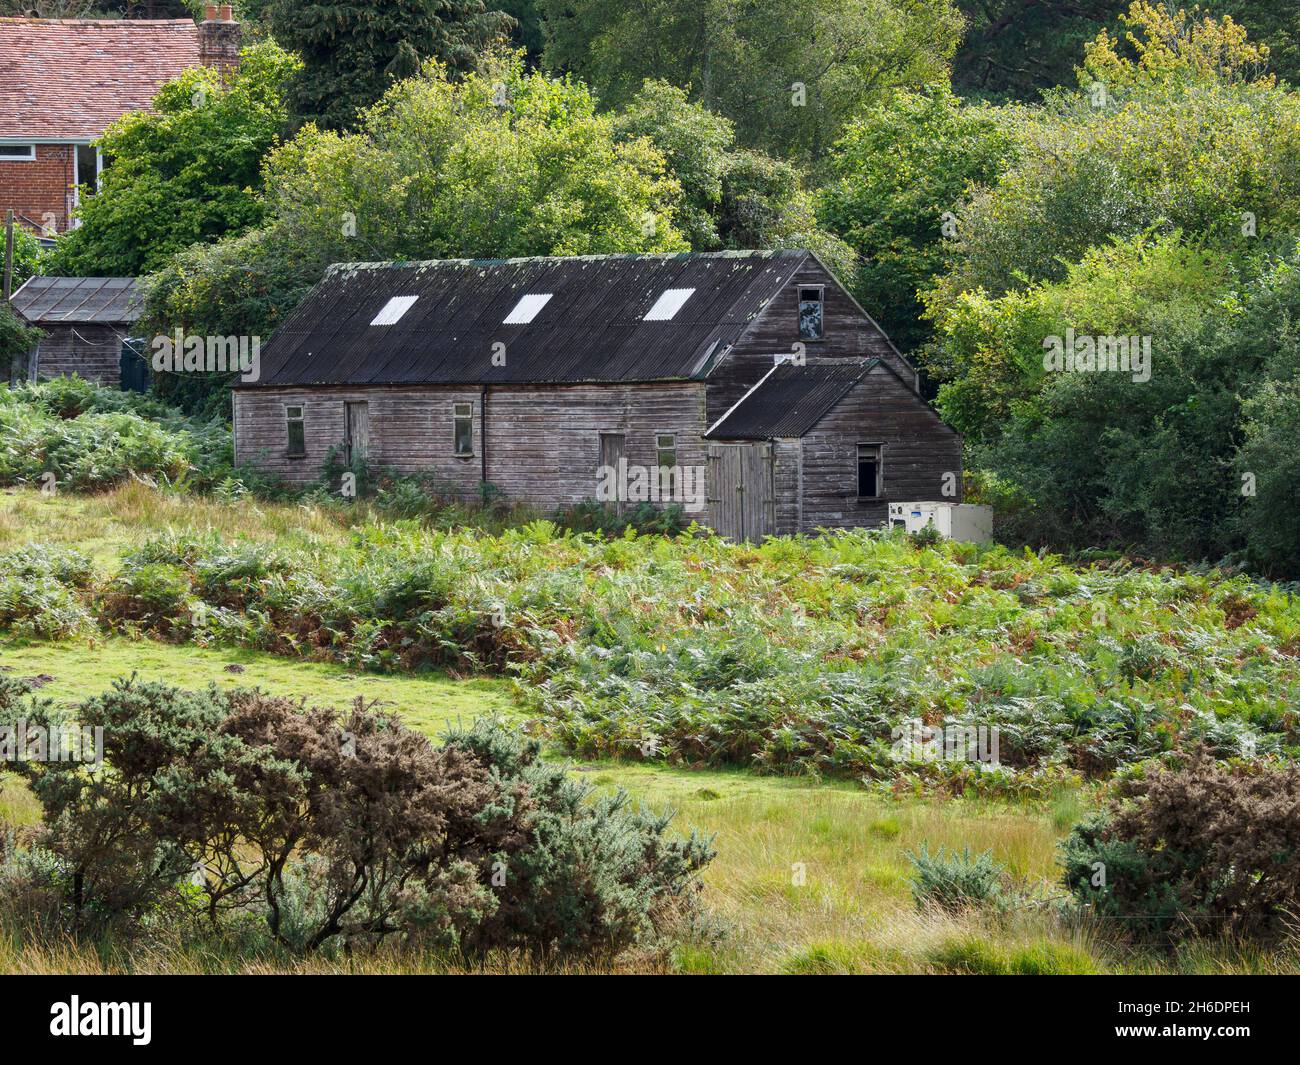 Rustic old wooden shack, The New Forest, Hampshire, UK Stock Photo